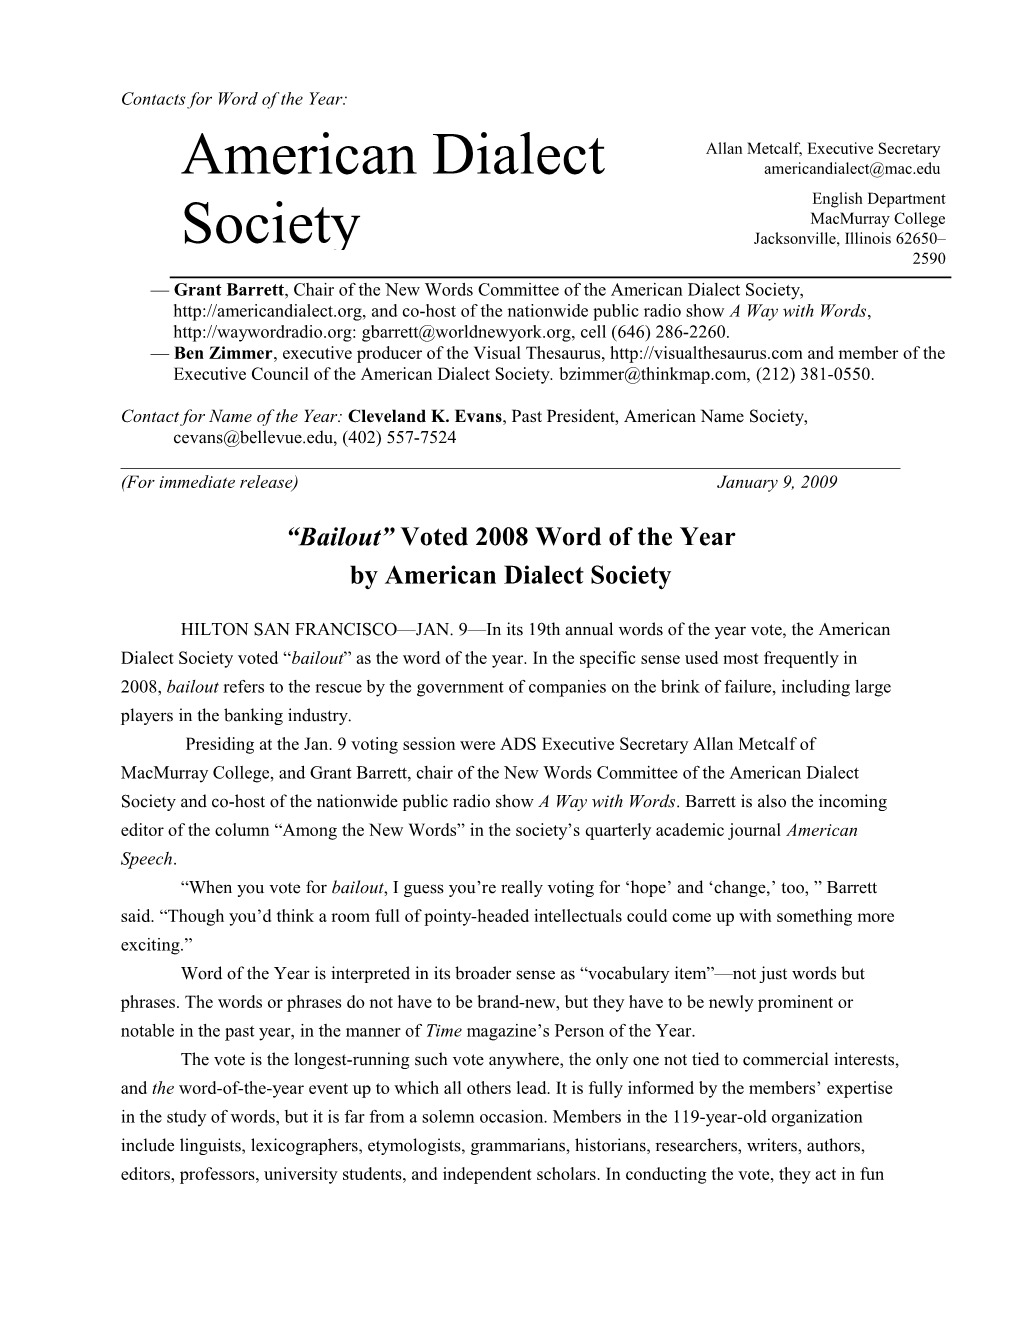 American Dialect Society: Words of the Year 1